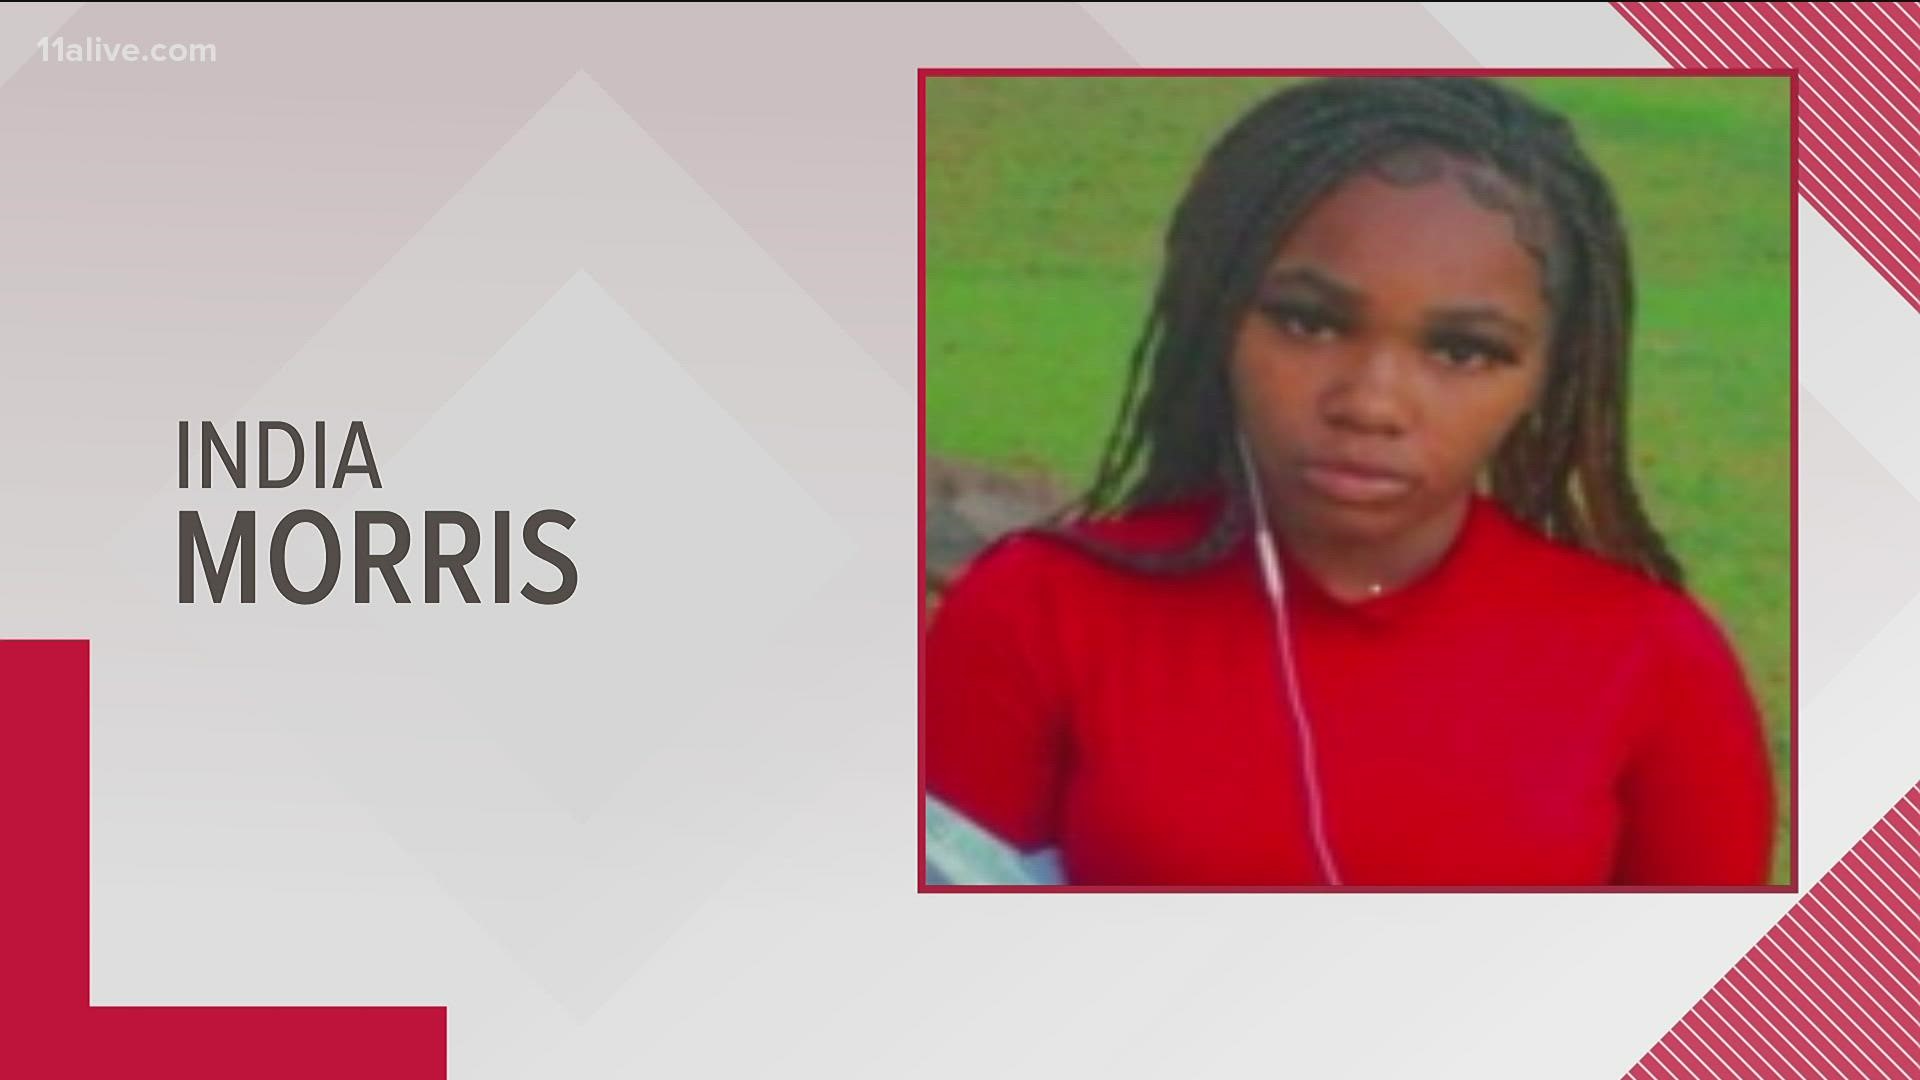 A Clayton County teenager has gone missing.